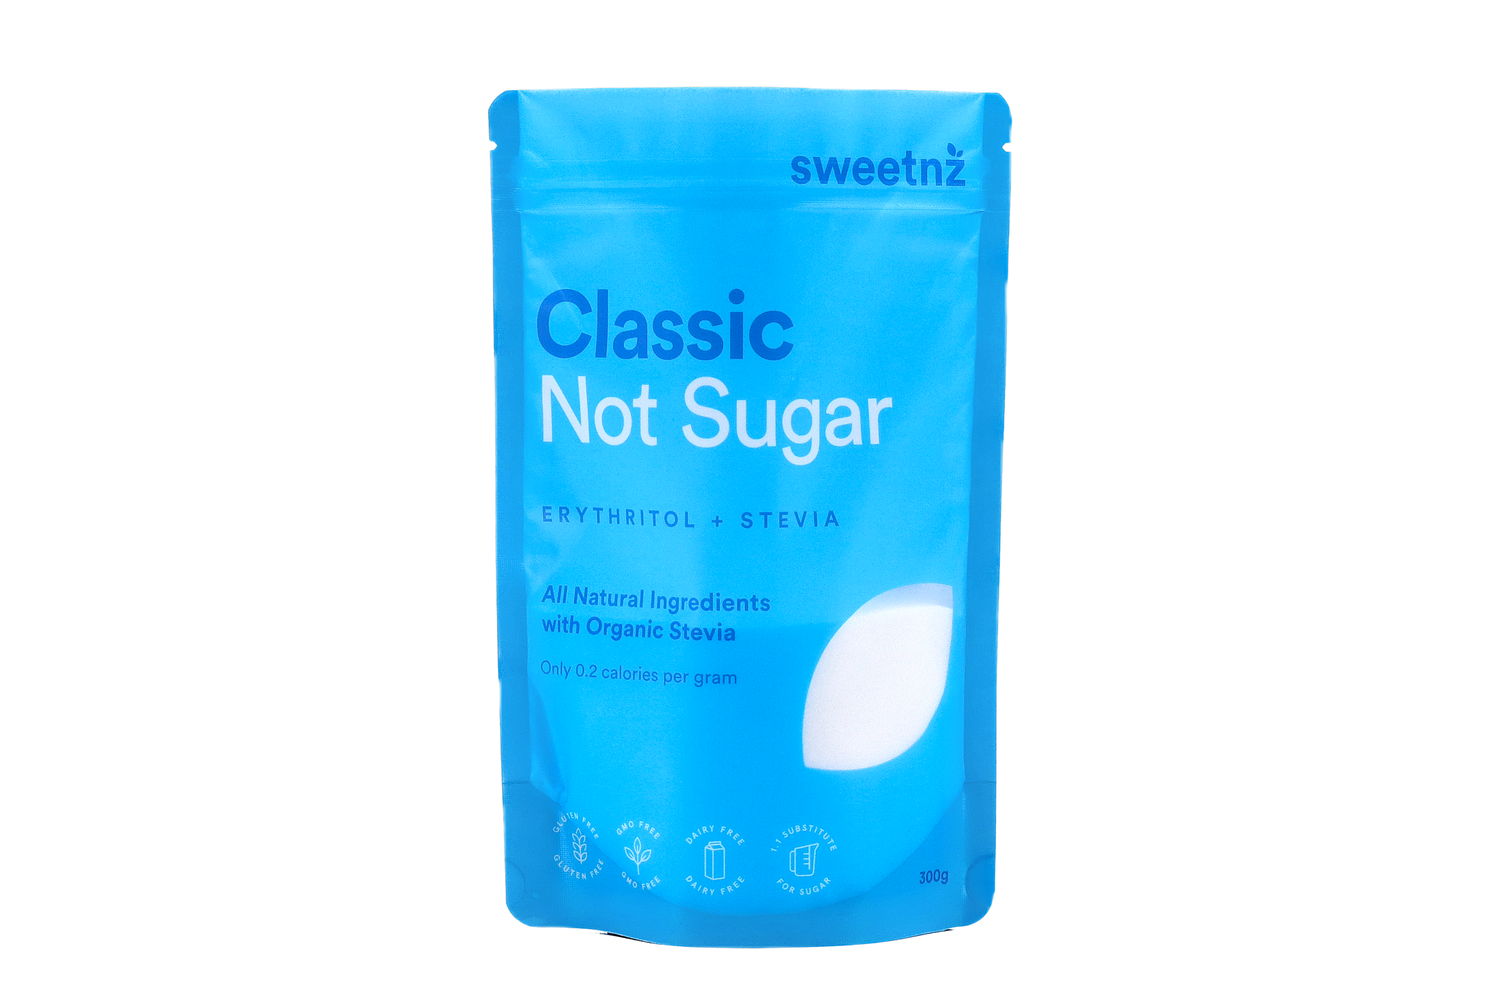 Classic Not Sugar 300g front view. All natural ingredients with organic Stevia. 